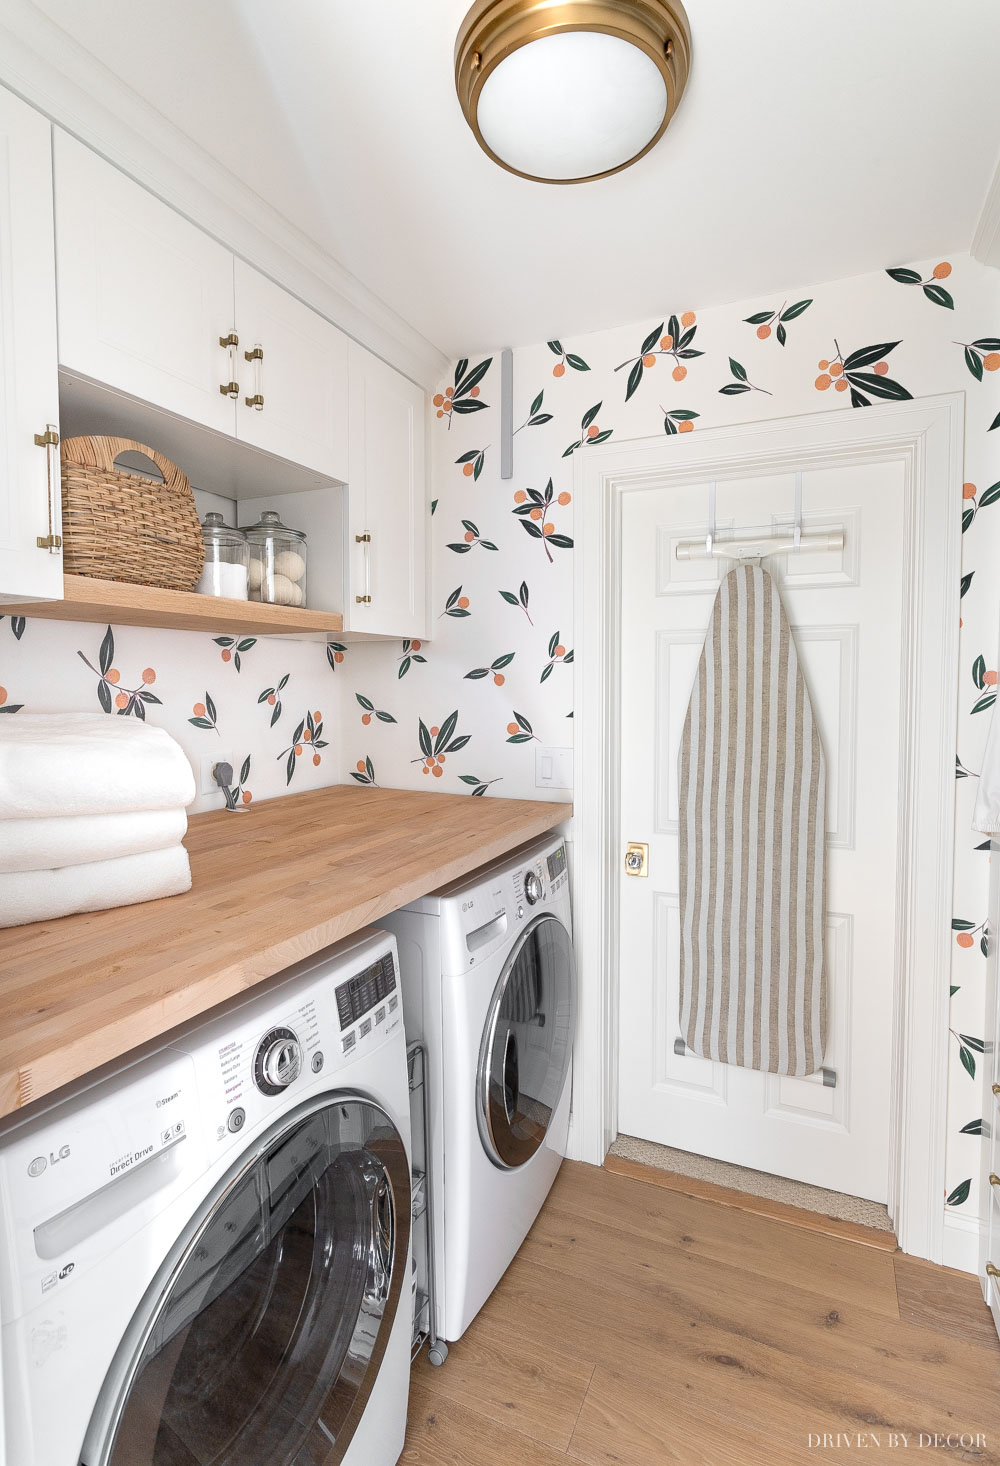 Love the IKEA cabinets above the washer and dryer in our laundry room!